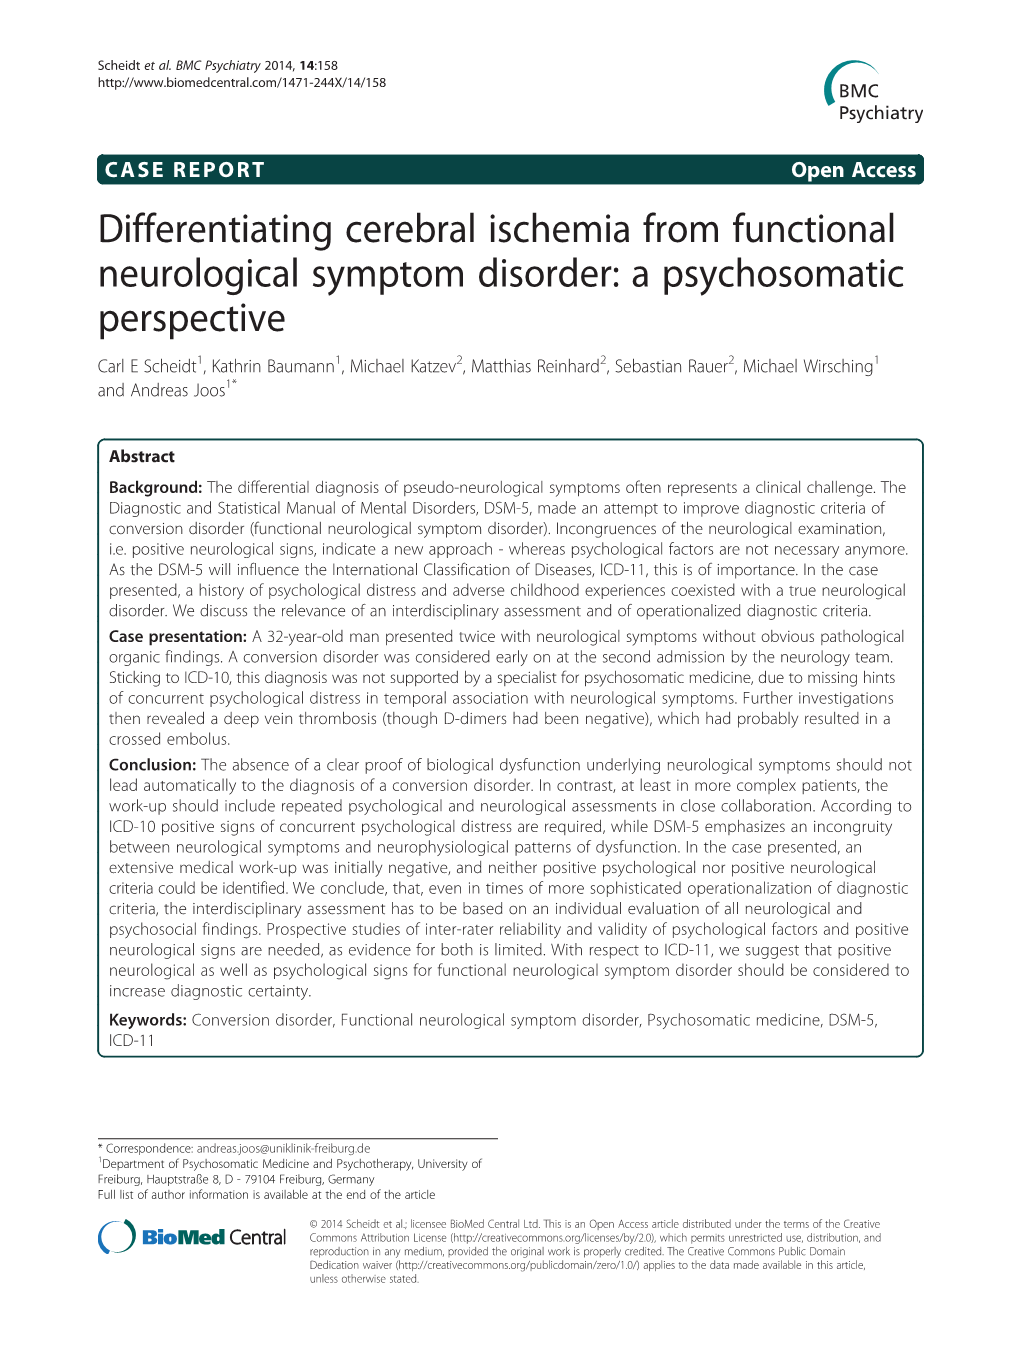 Differentiating Cerebral Ischemia from Functional